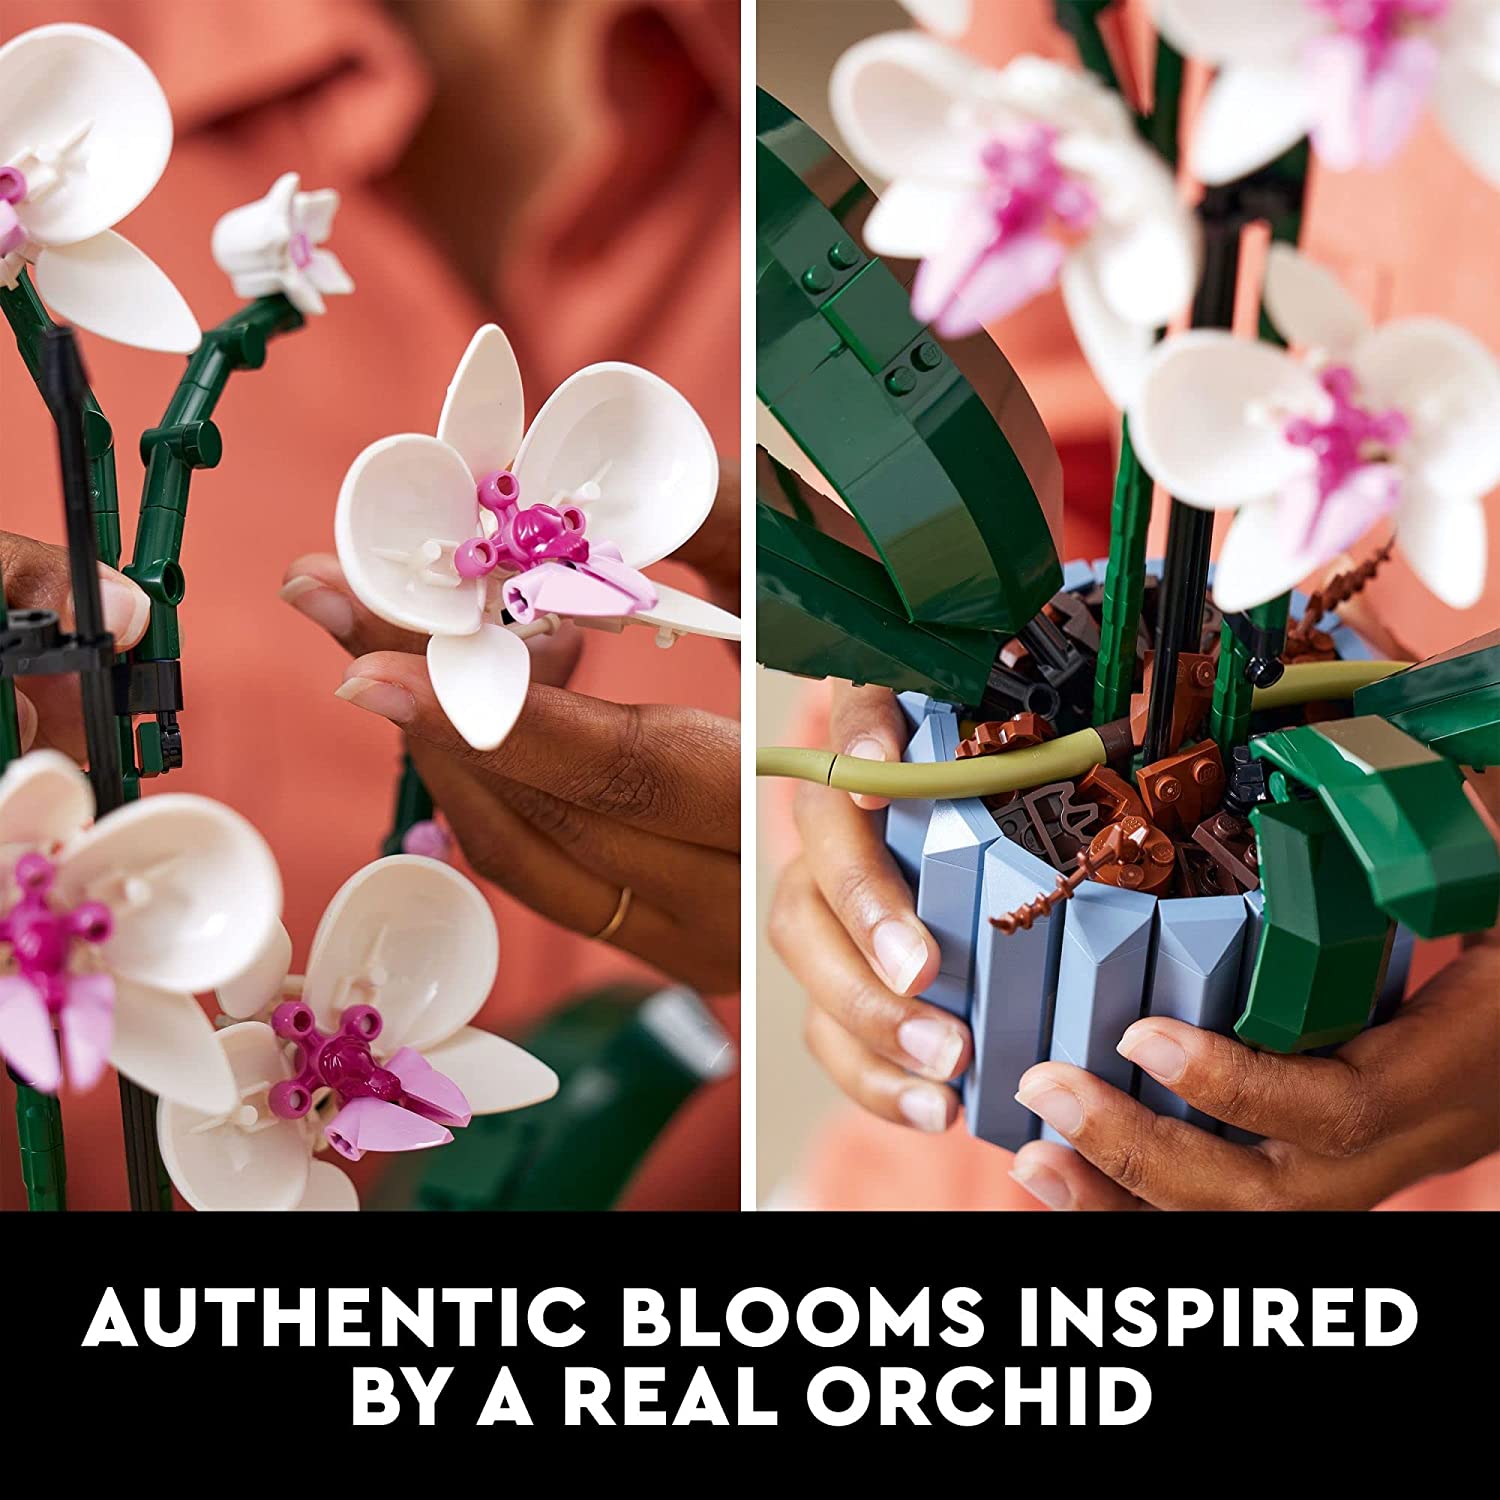 lego flower orchid